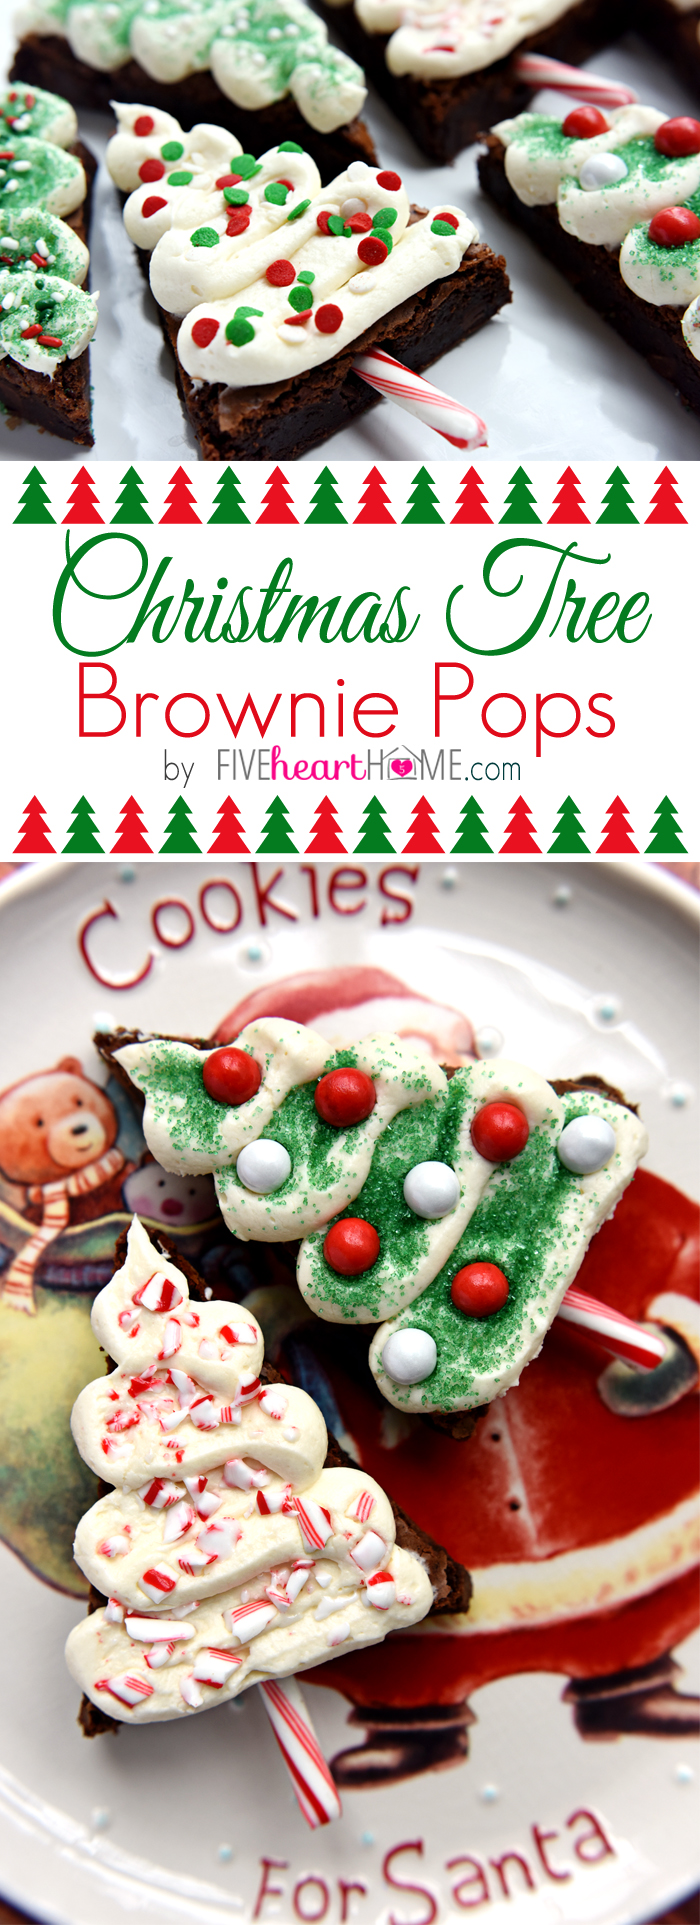 Christmas-tree-brownie-pops-christmas-cookies-for-santa-by-five-heart-home_700pxtitlecollage